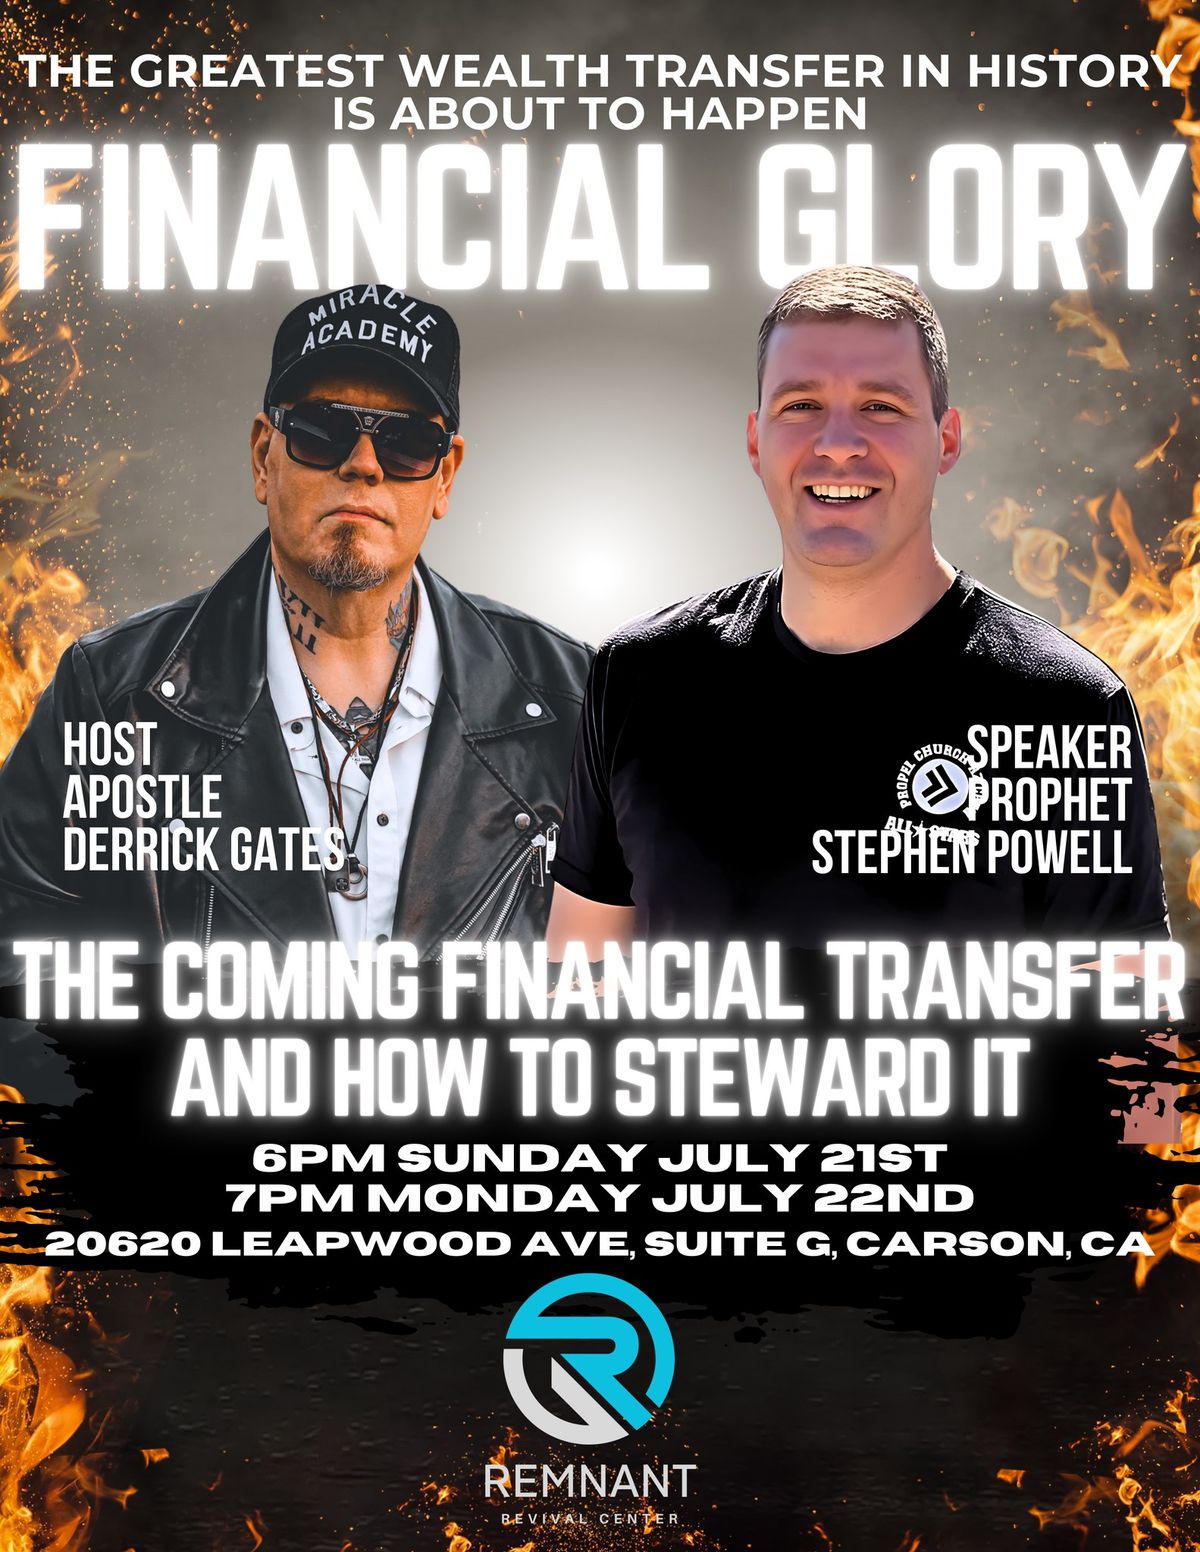 Financial Glory! The coming financial transfer and how to STEWARD it.